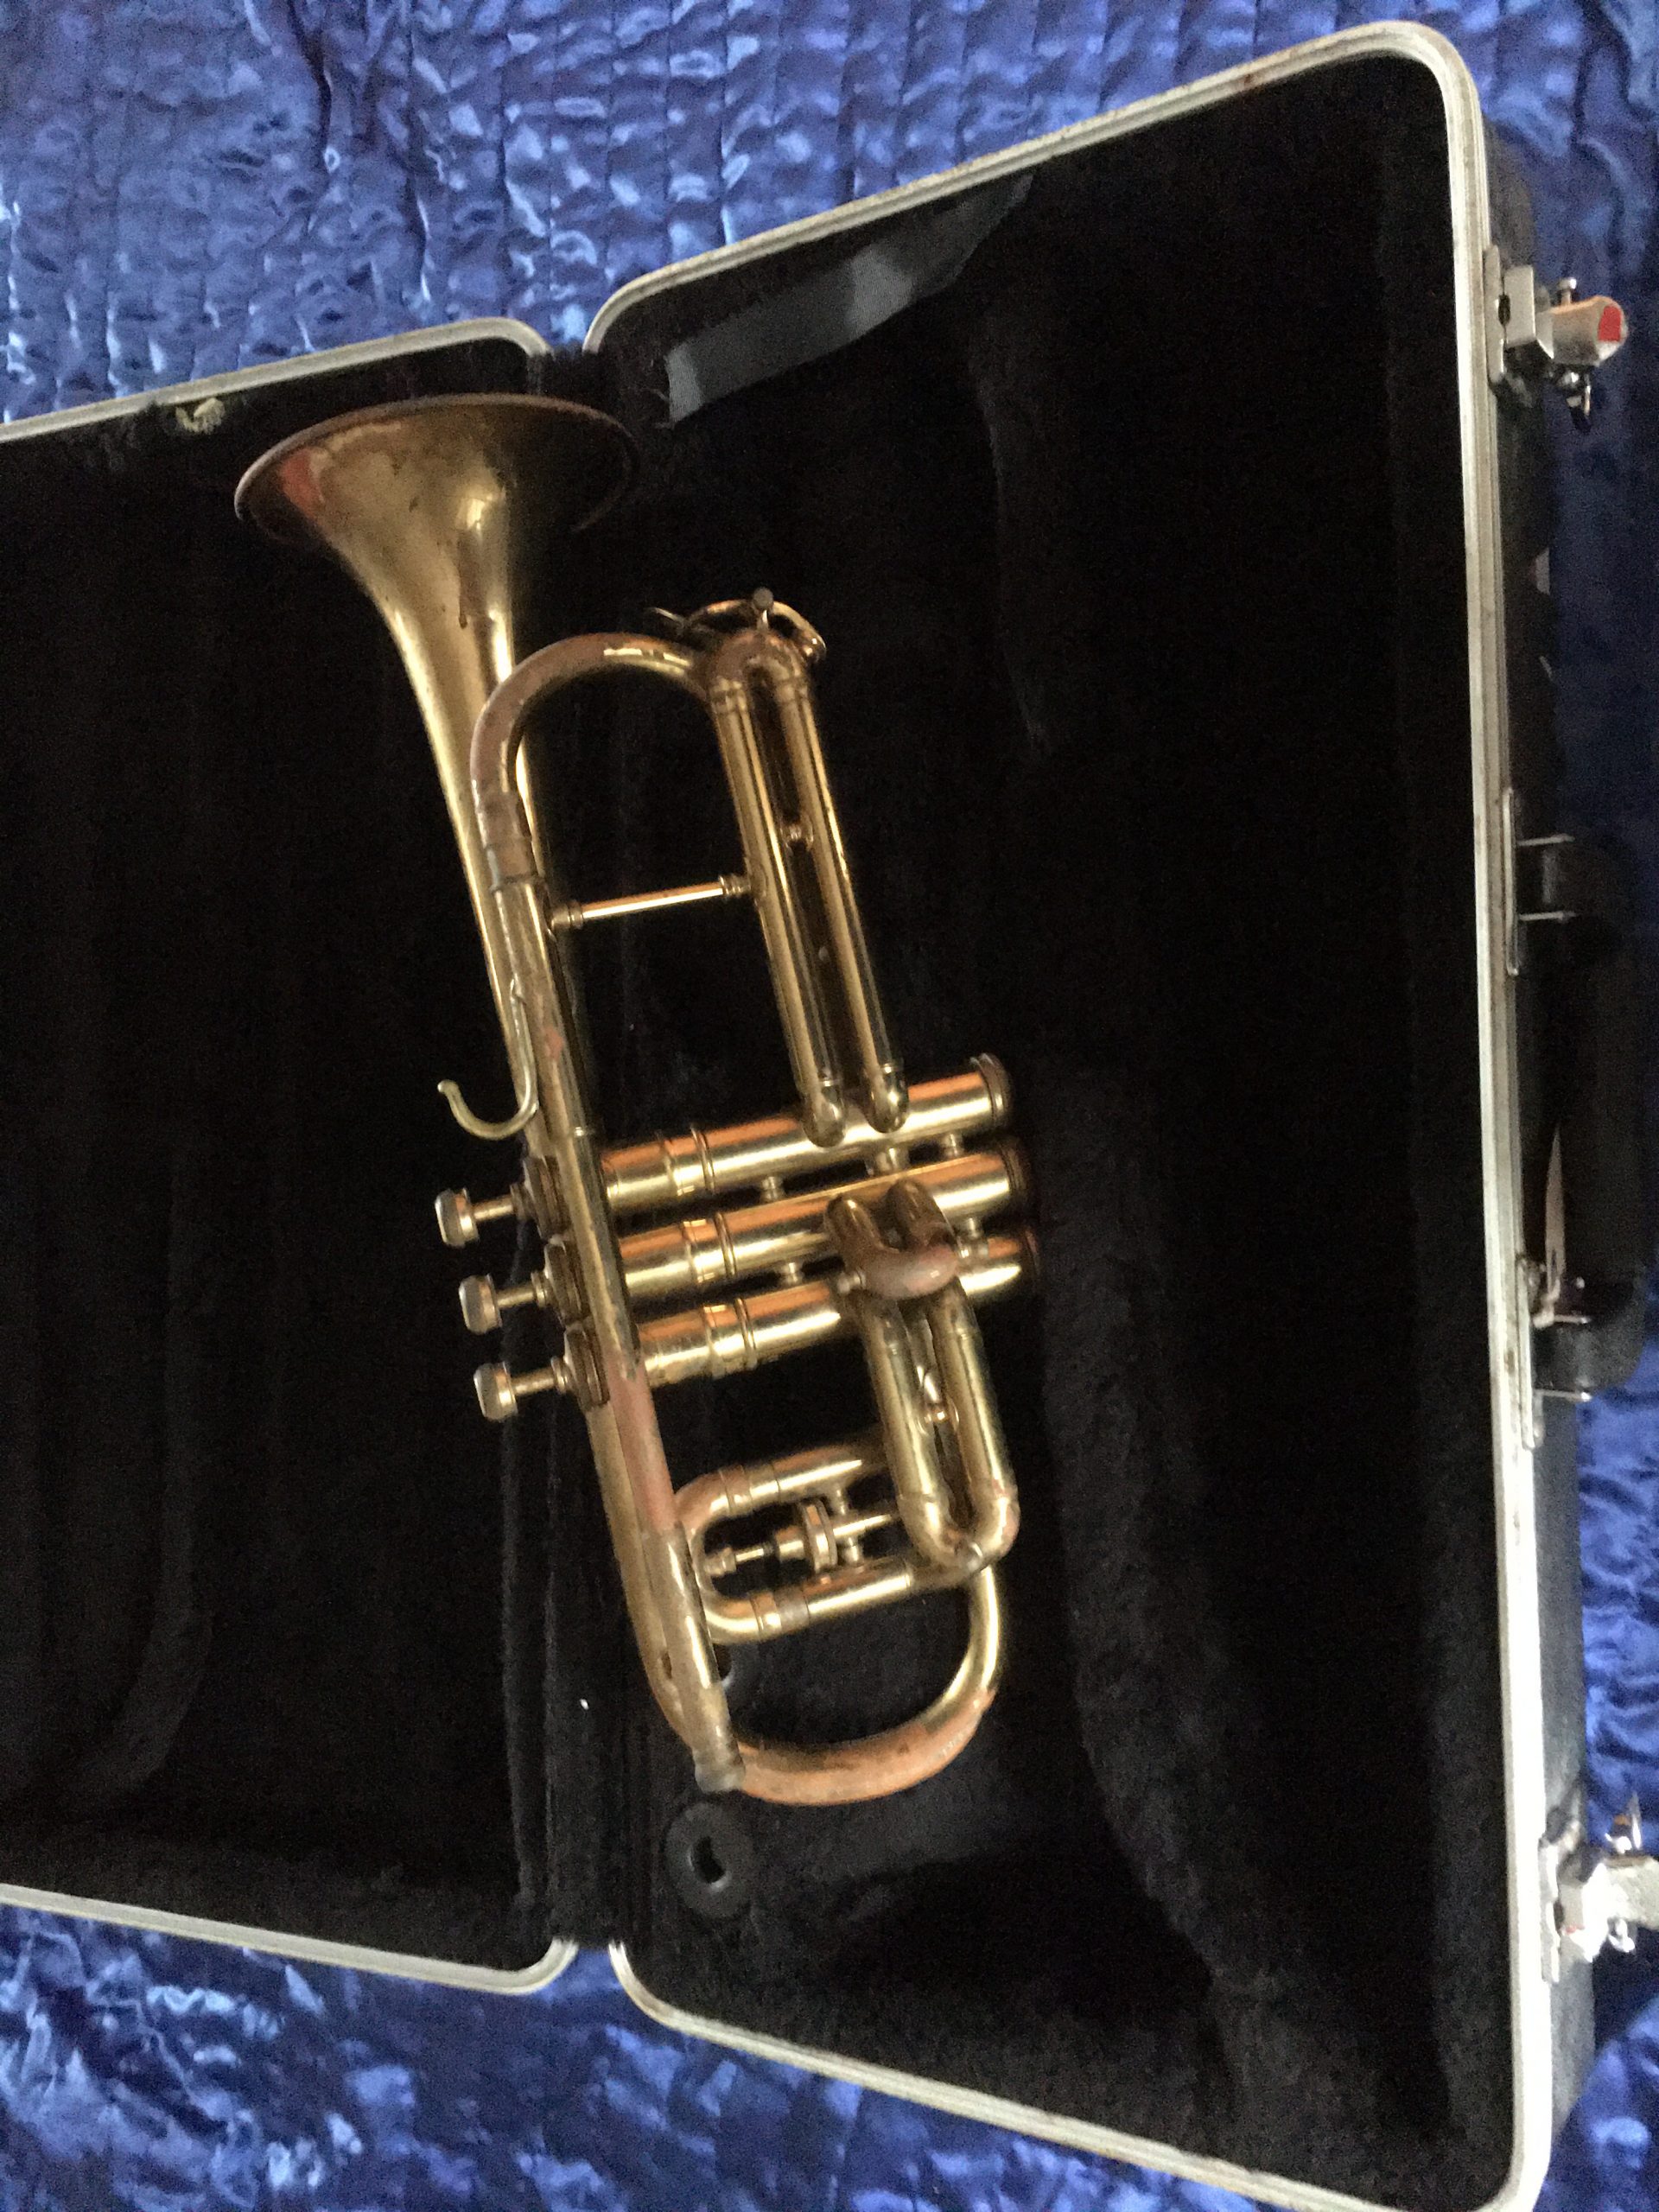 You are currently viewing Conn Victor Short Model Cornet